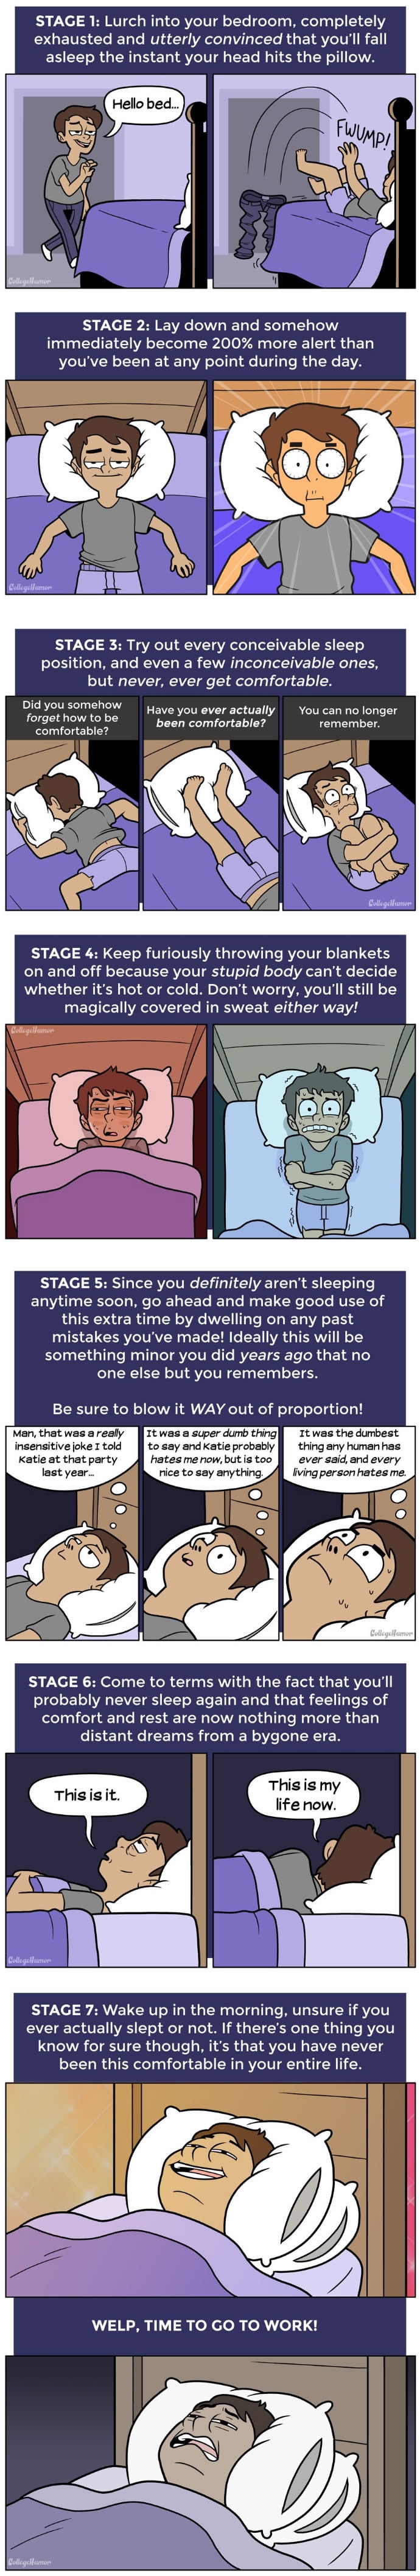 7 stages of not sleeping at night